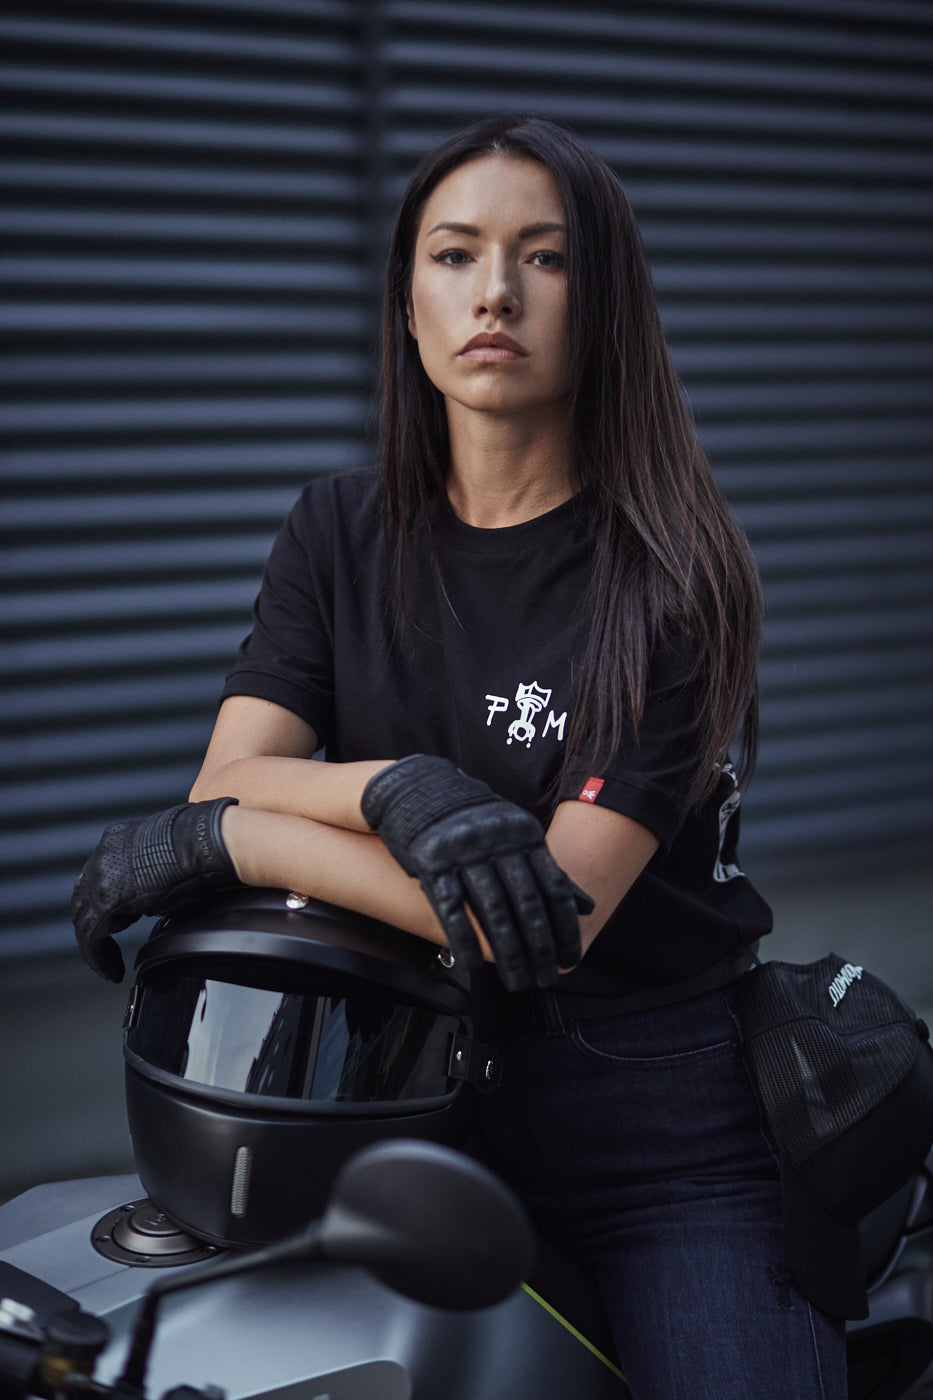 A young woman on a motorcycle leaning on a helmet